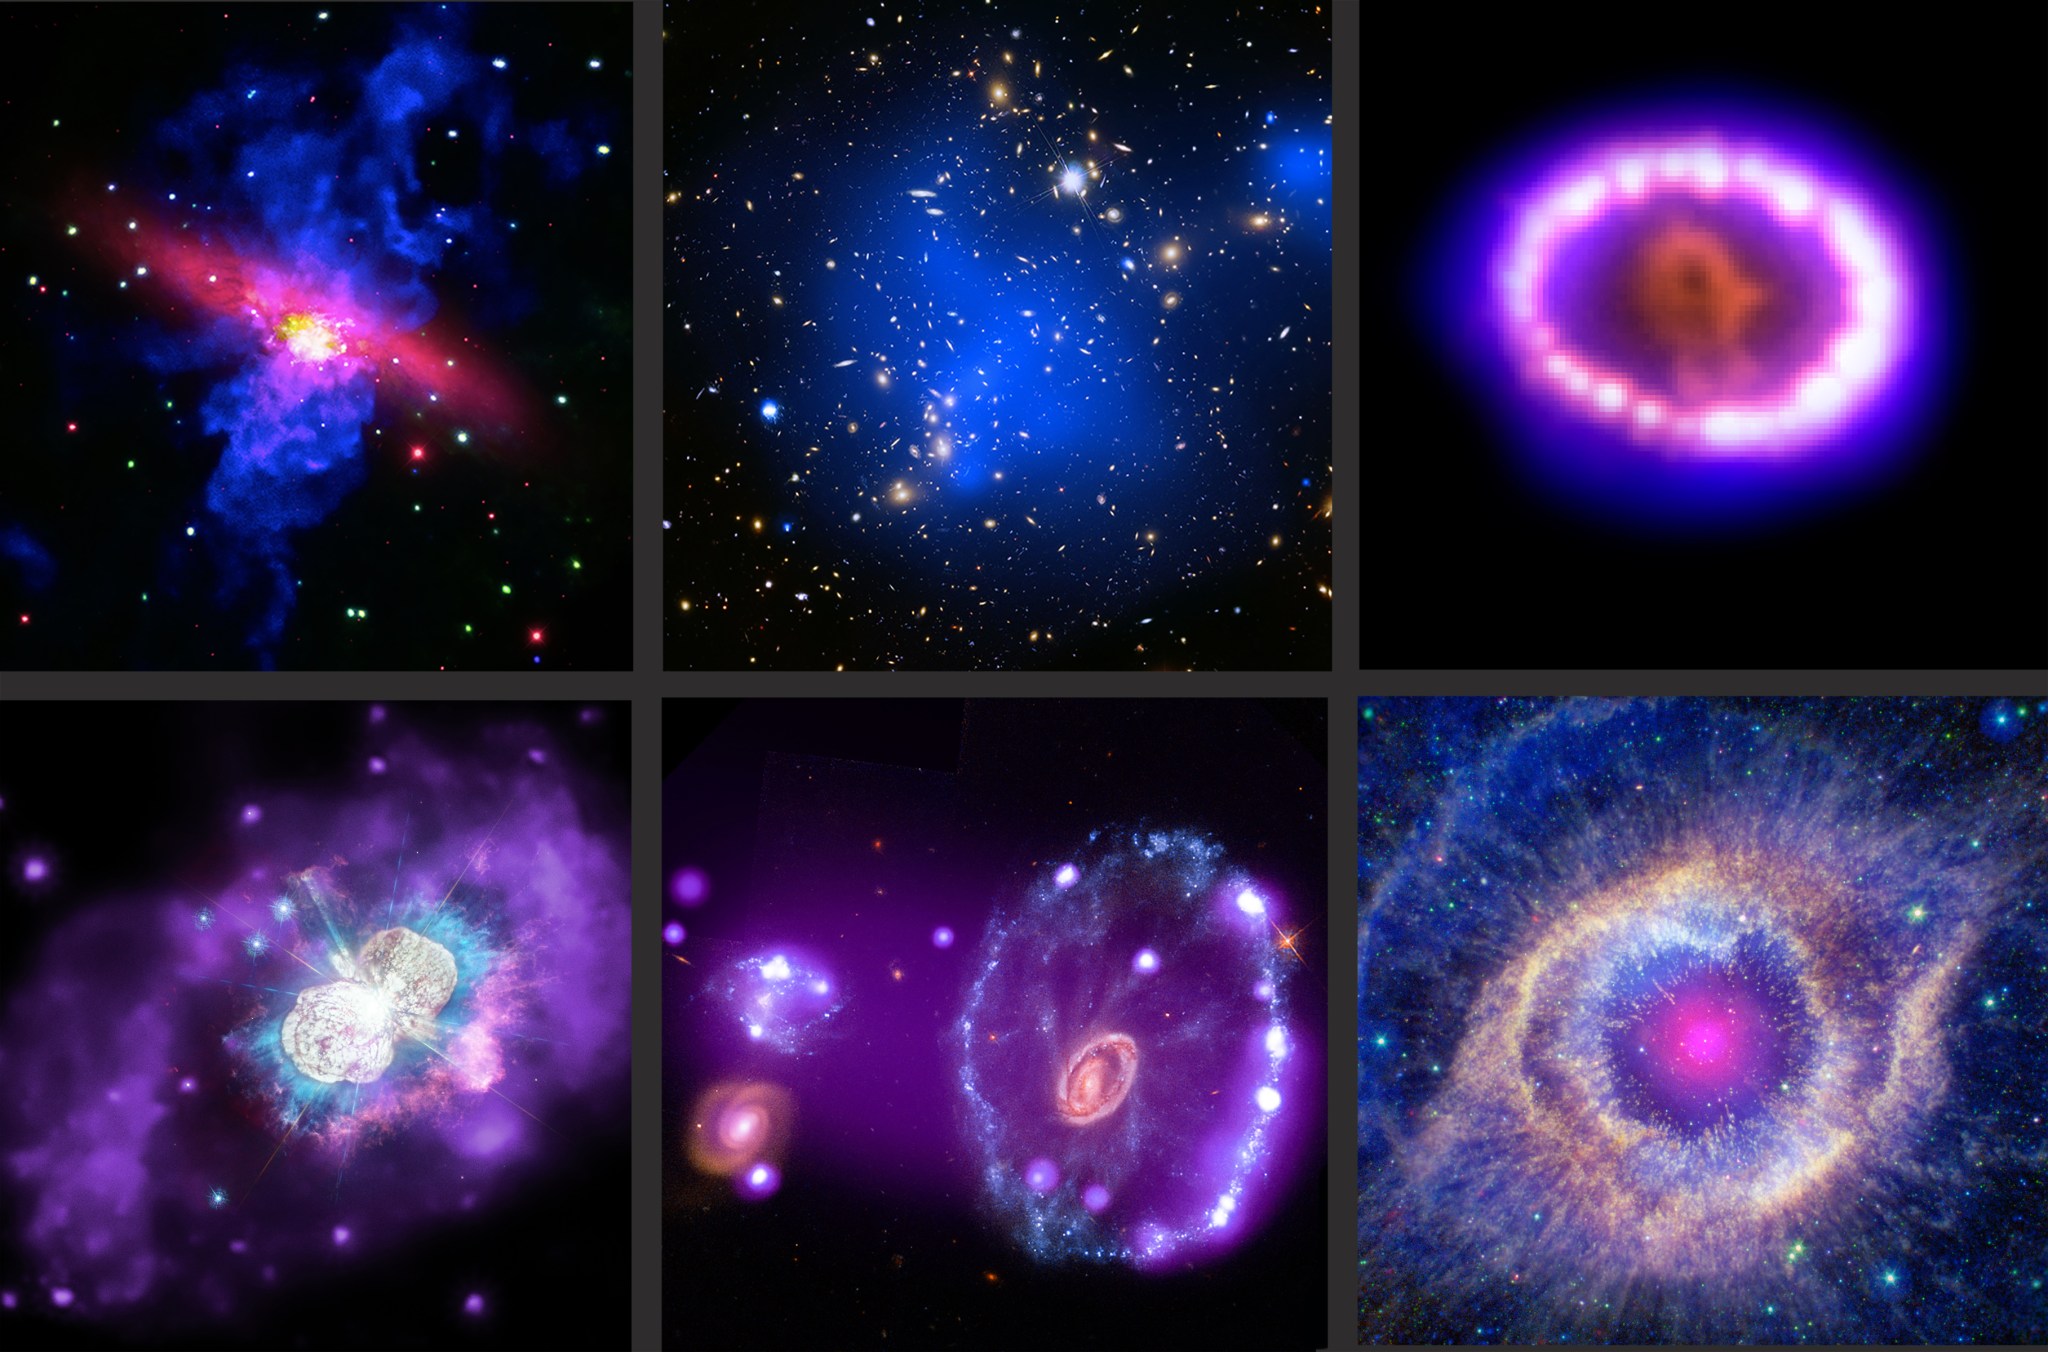 This selection of images of different kinds of light have been combined to better understand the universe.